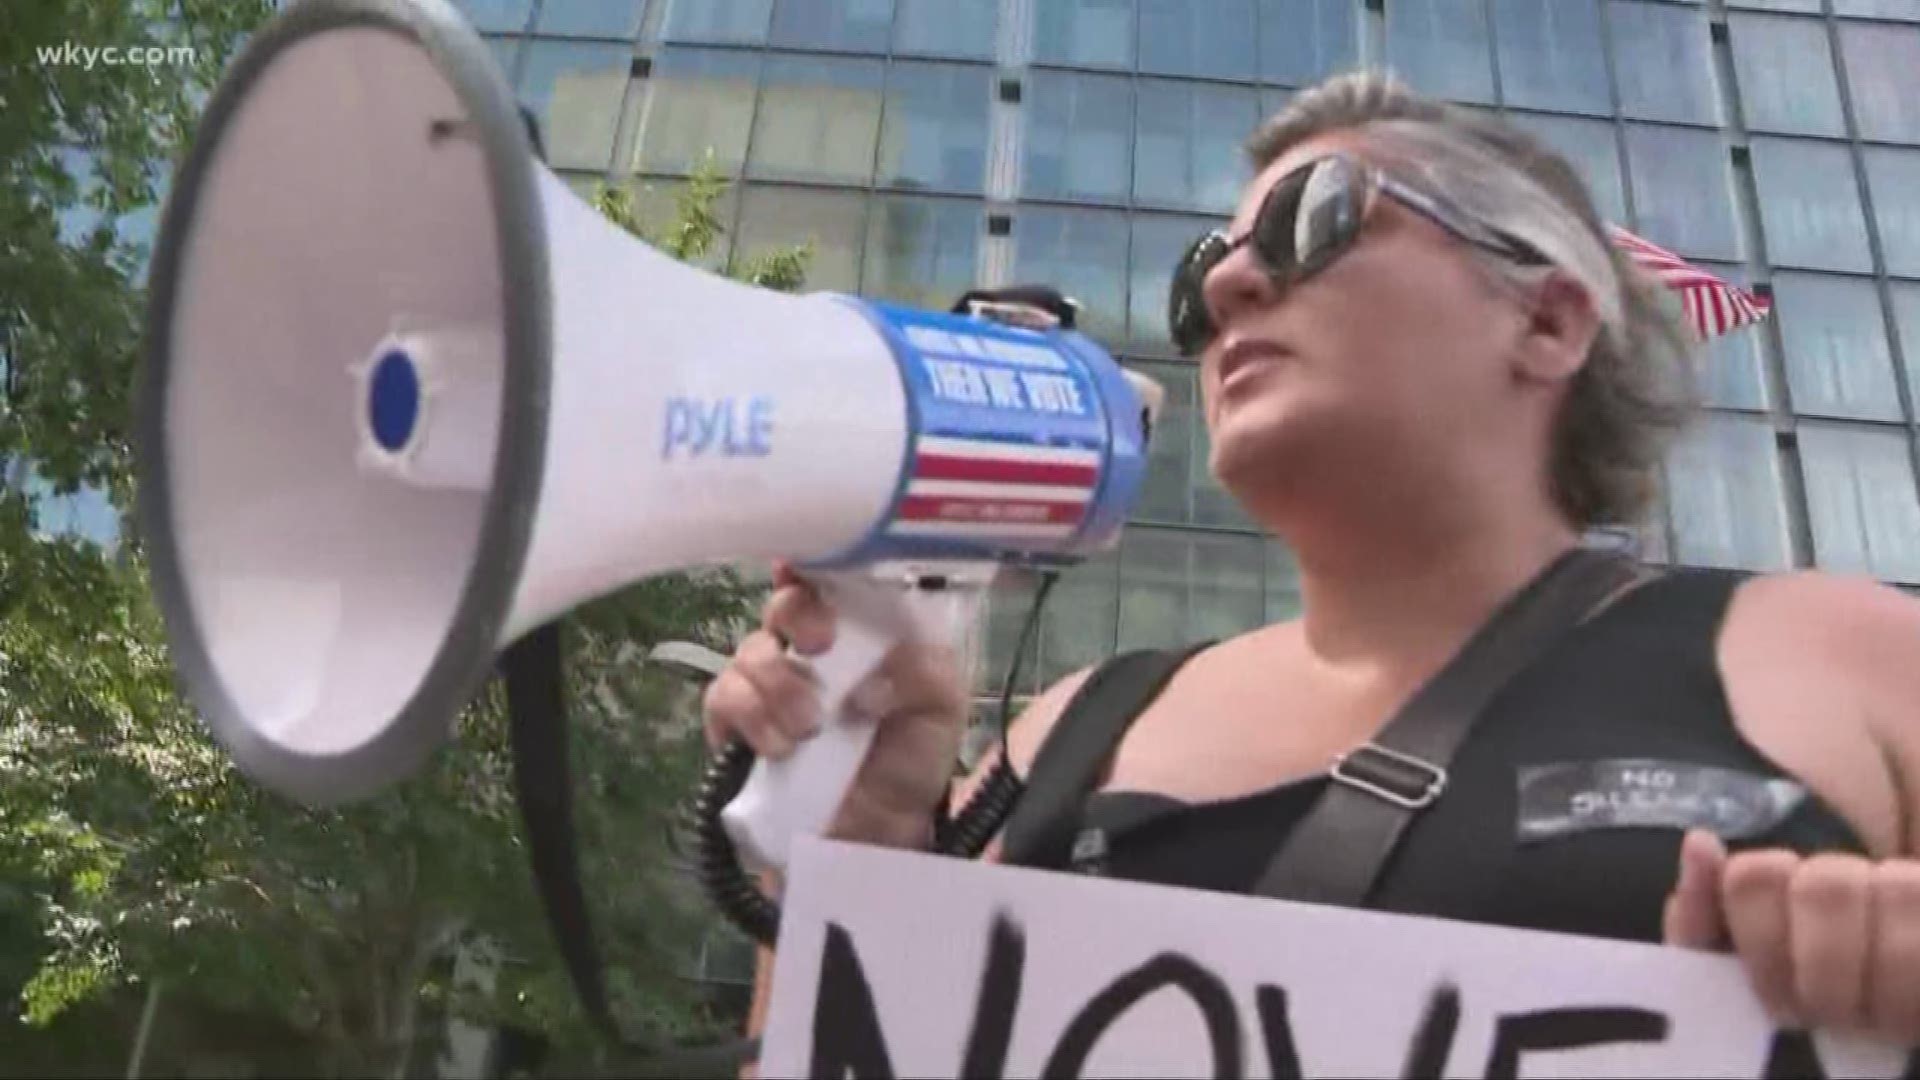 Outrage over Brett Kavanaugh's confirmation sparks protests in downtown Cleveland